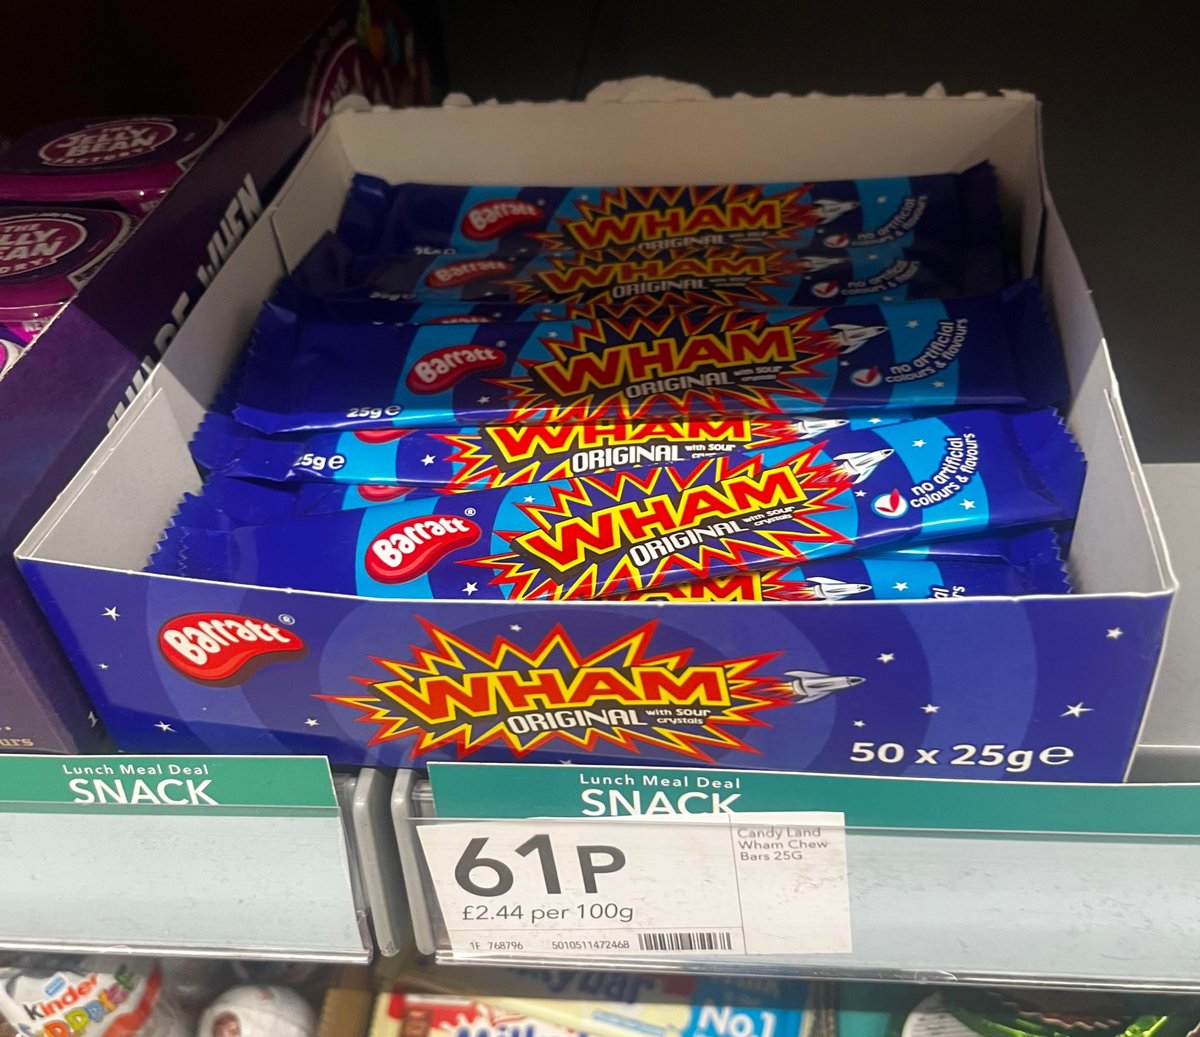 61p for a Wham bar. This country is finished.